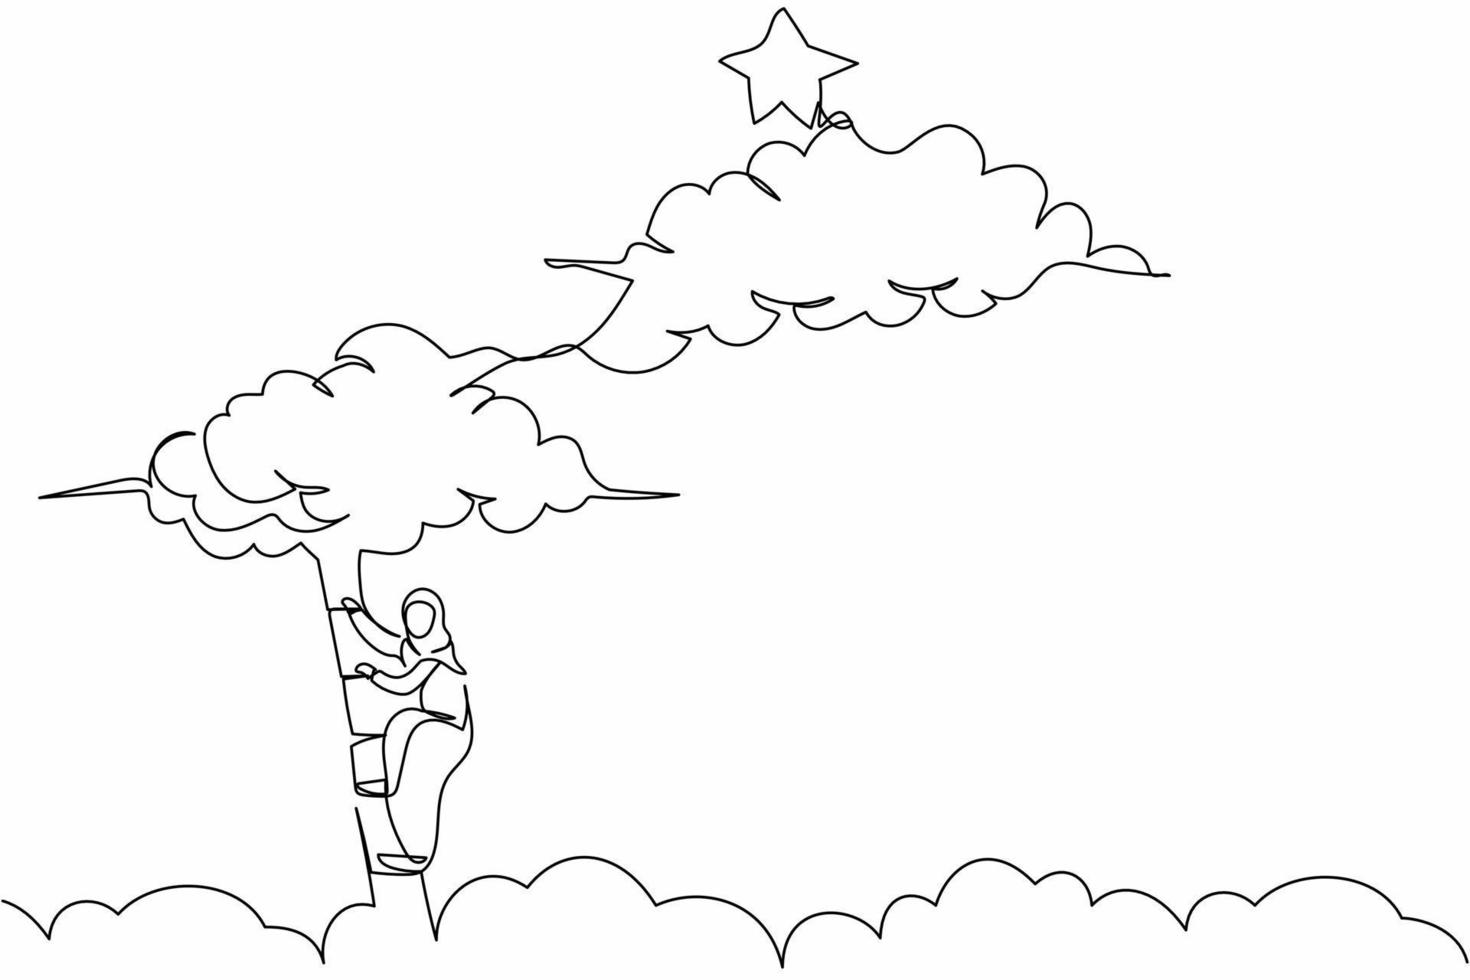 Continuous one line drawing Arab businesswoman climbing ladder to reach out for stars. Office worker climb career path goal. Successful motivation. Single line draw design vector graphic illustration